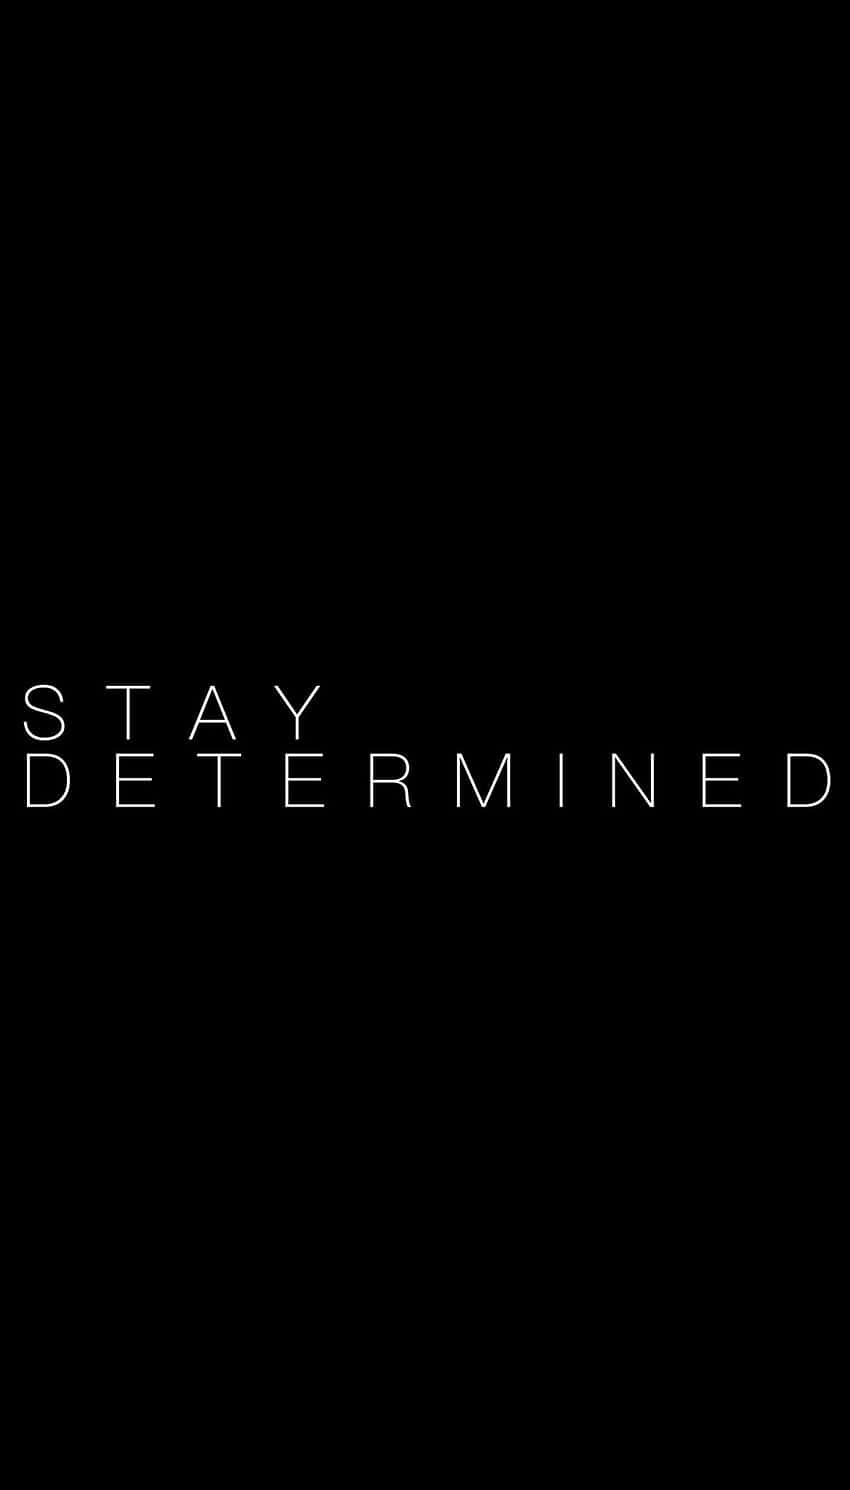 Stay Determined Inspirational Quote Wallpaper